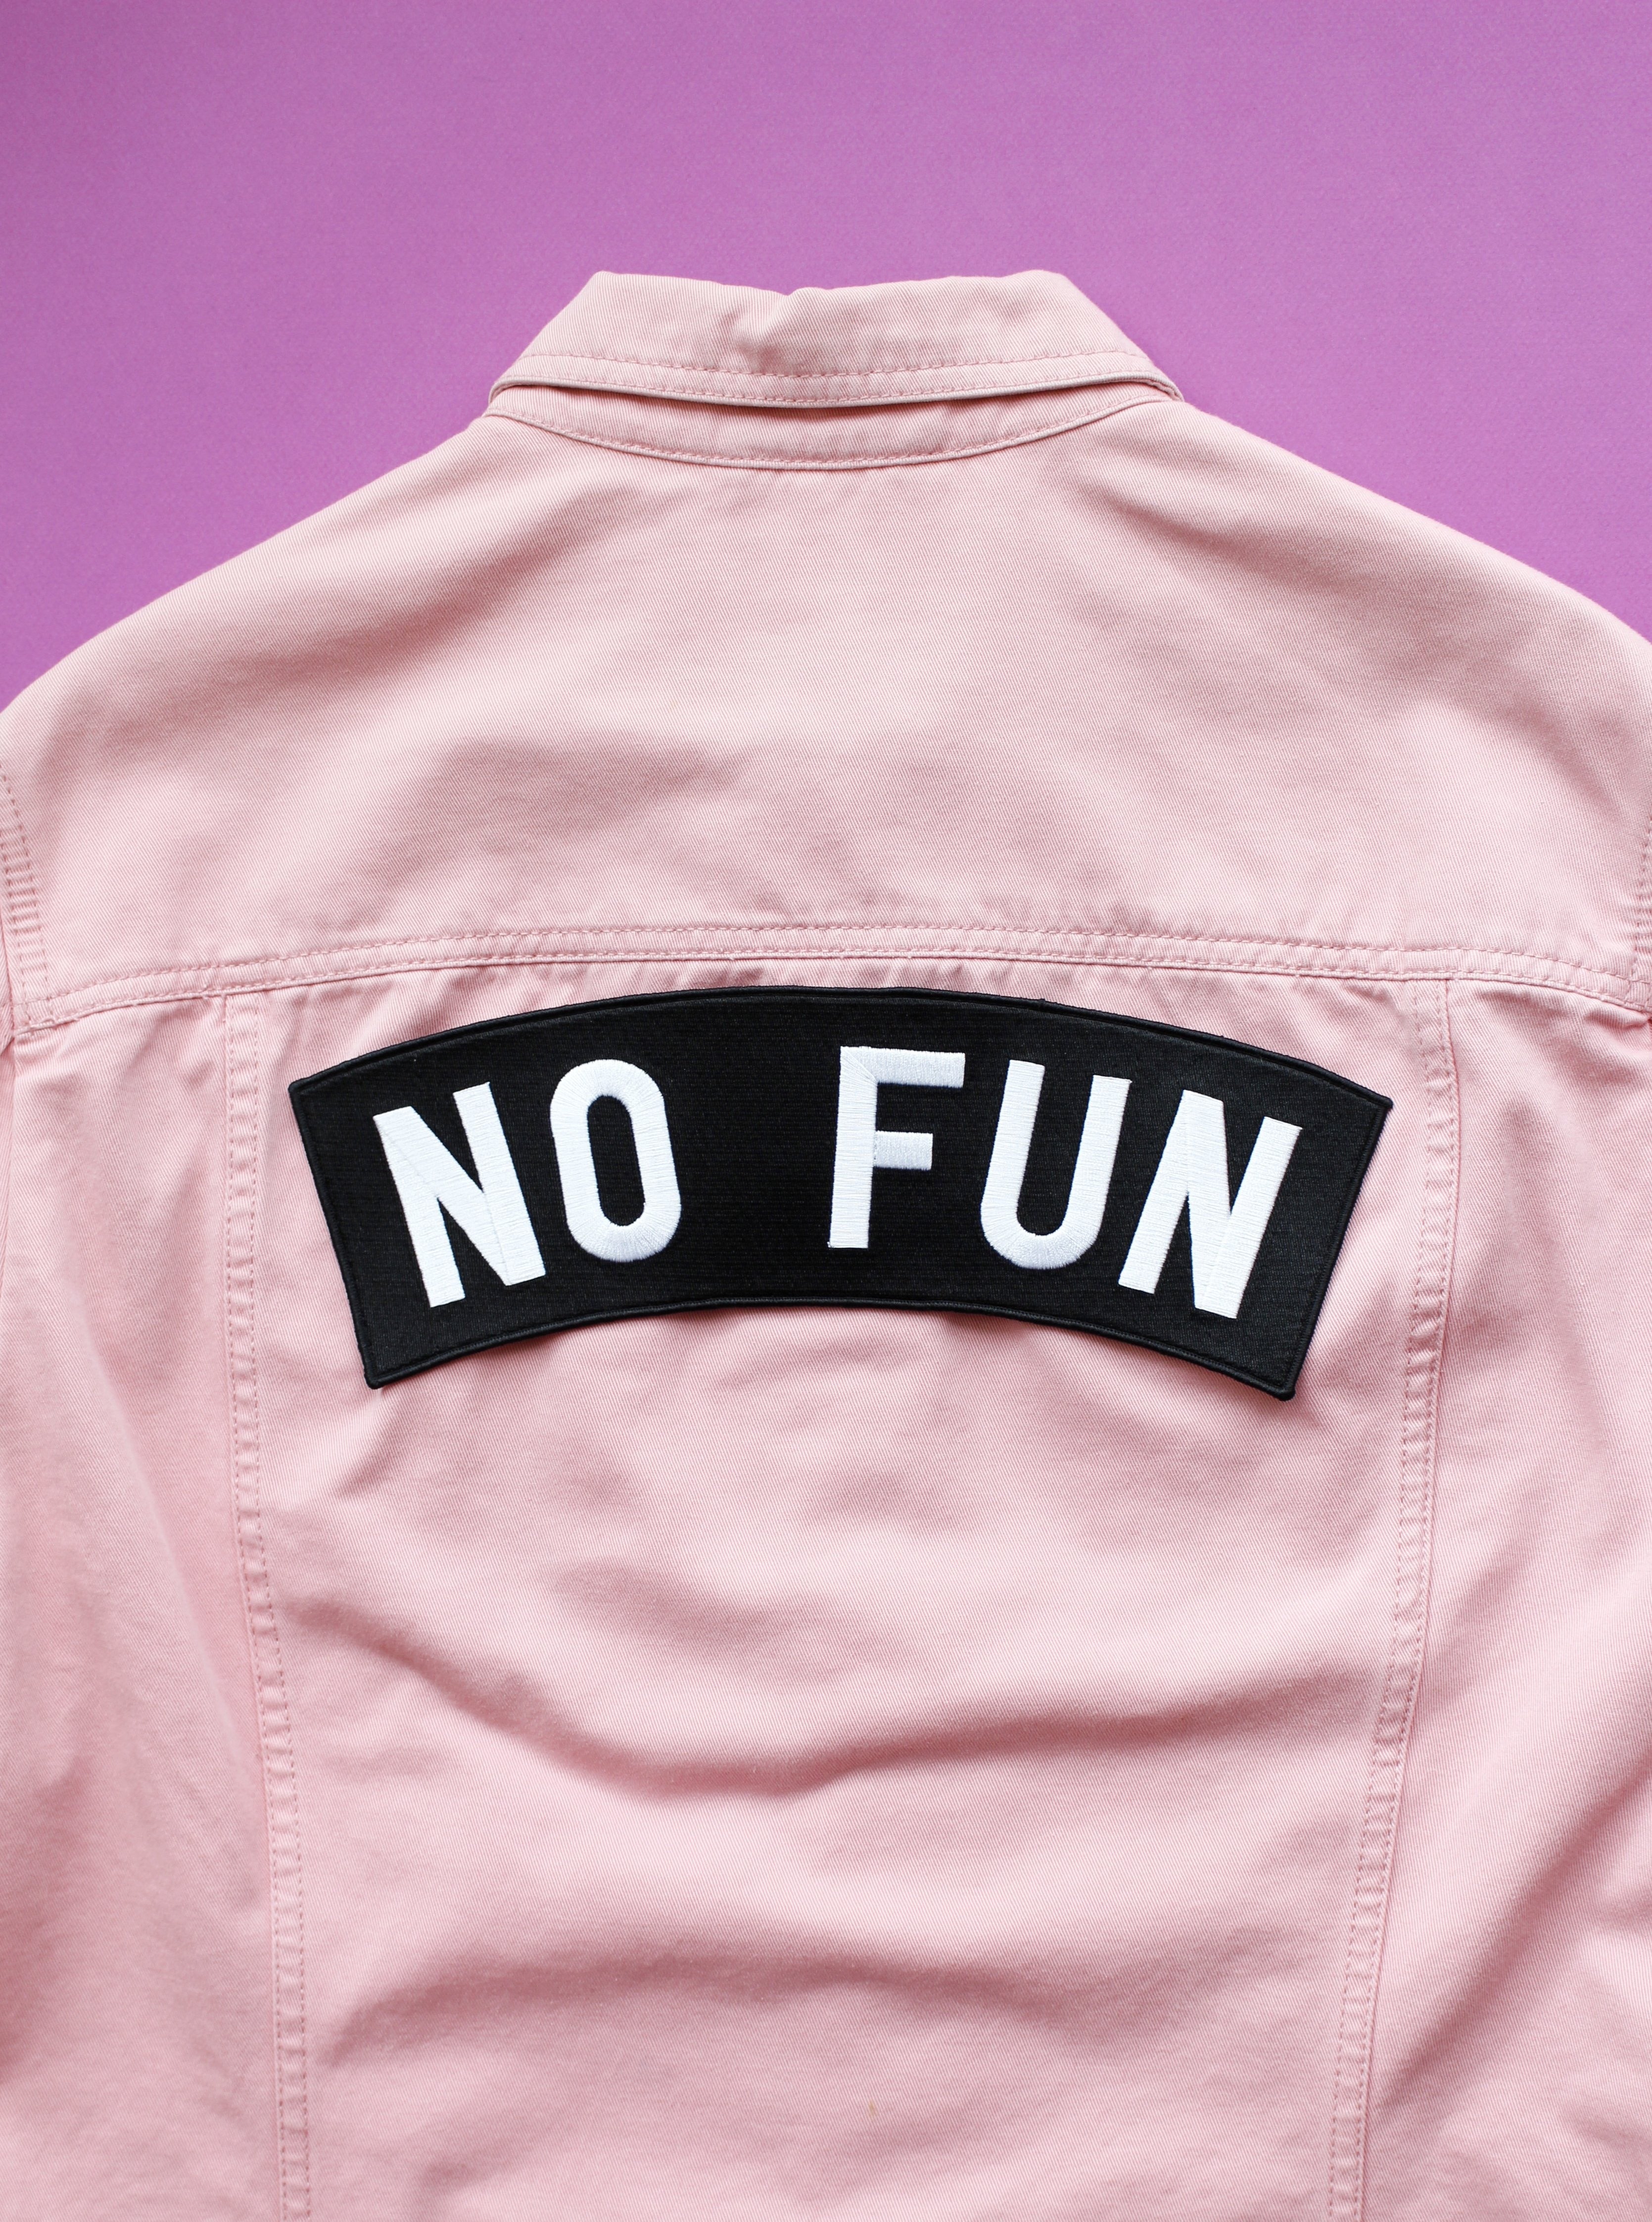 Original "No Fun" XL size rocker embroidered iron-on back patch.  Patch is adhered on a pink denim jacket, set against a purple background.